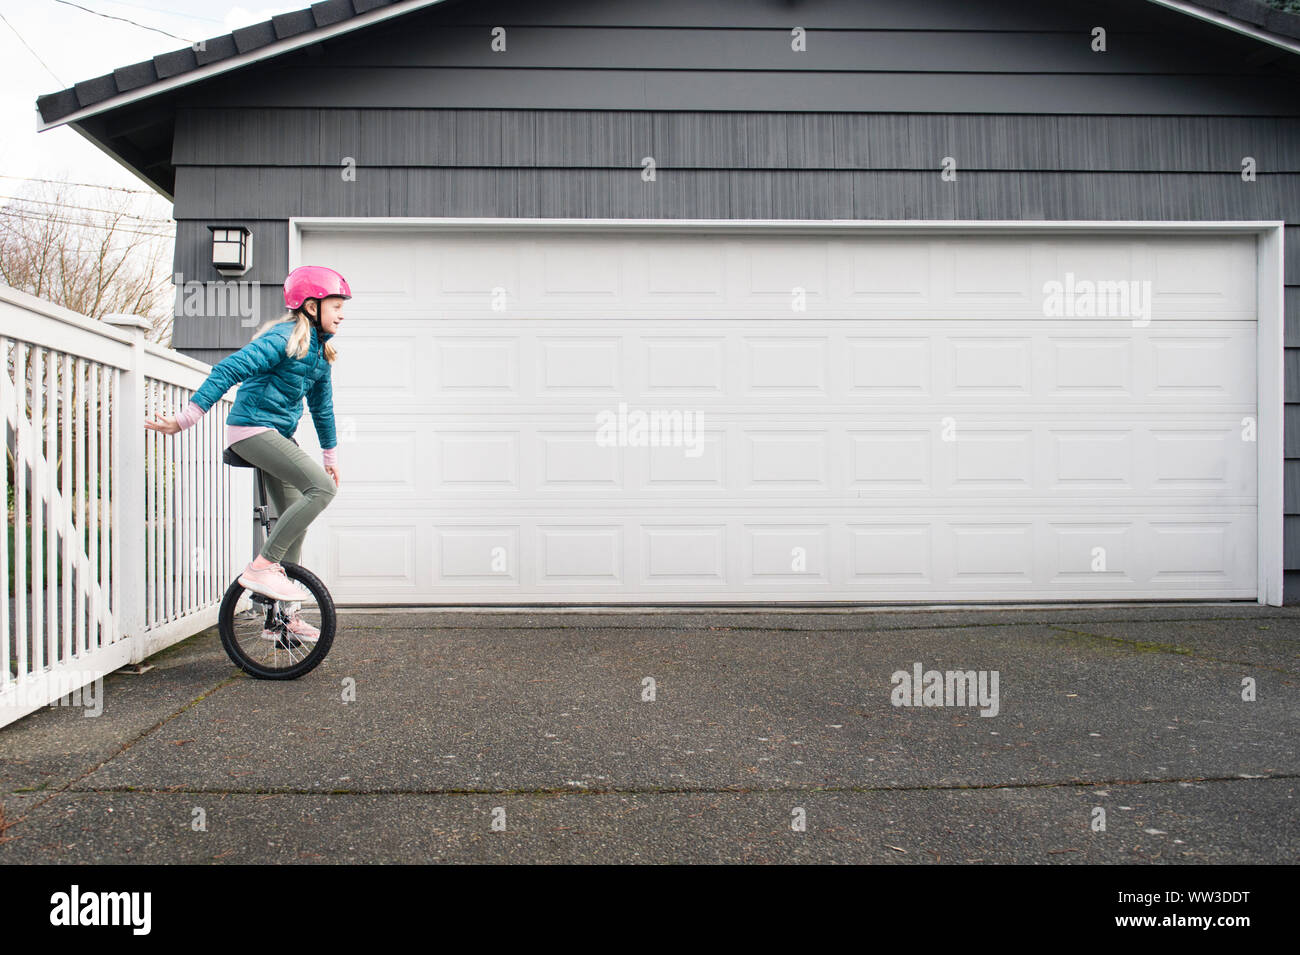 Young Girl Riding Unicycle in Driveway on an Overcast Day Stock Photo